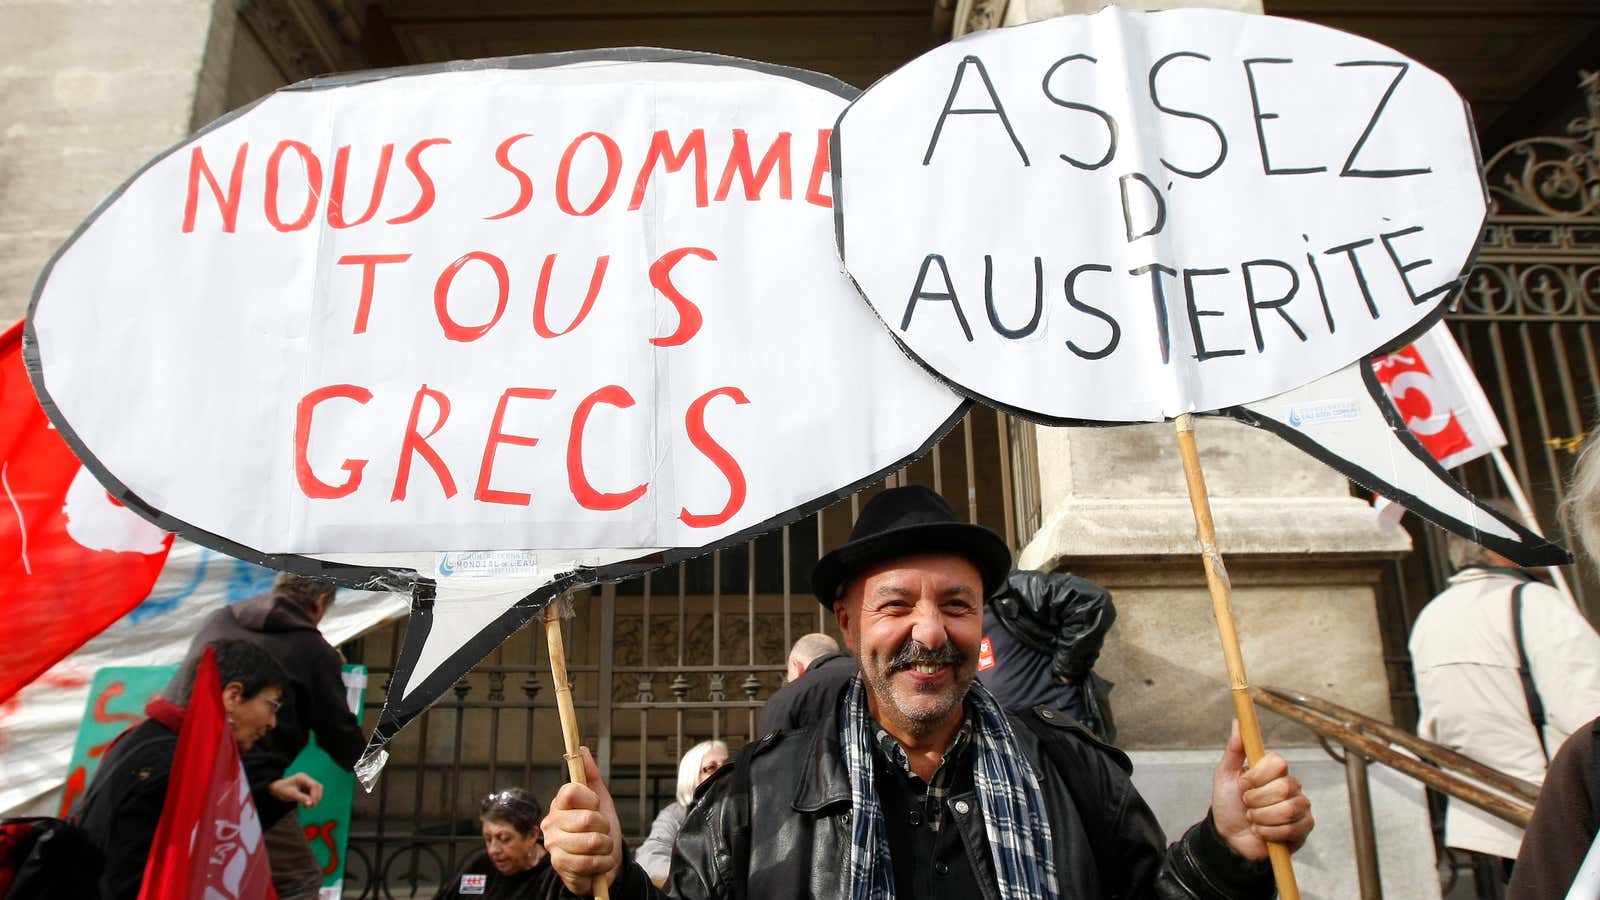 “We are all Greeks.” Be careful what you wish for…